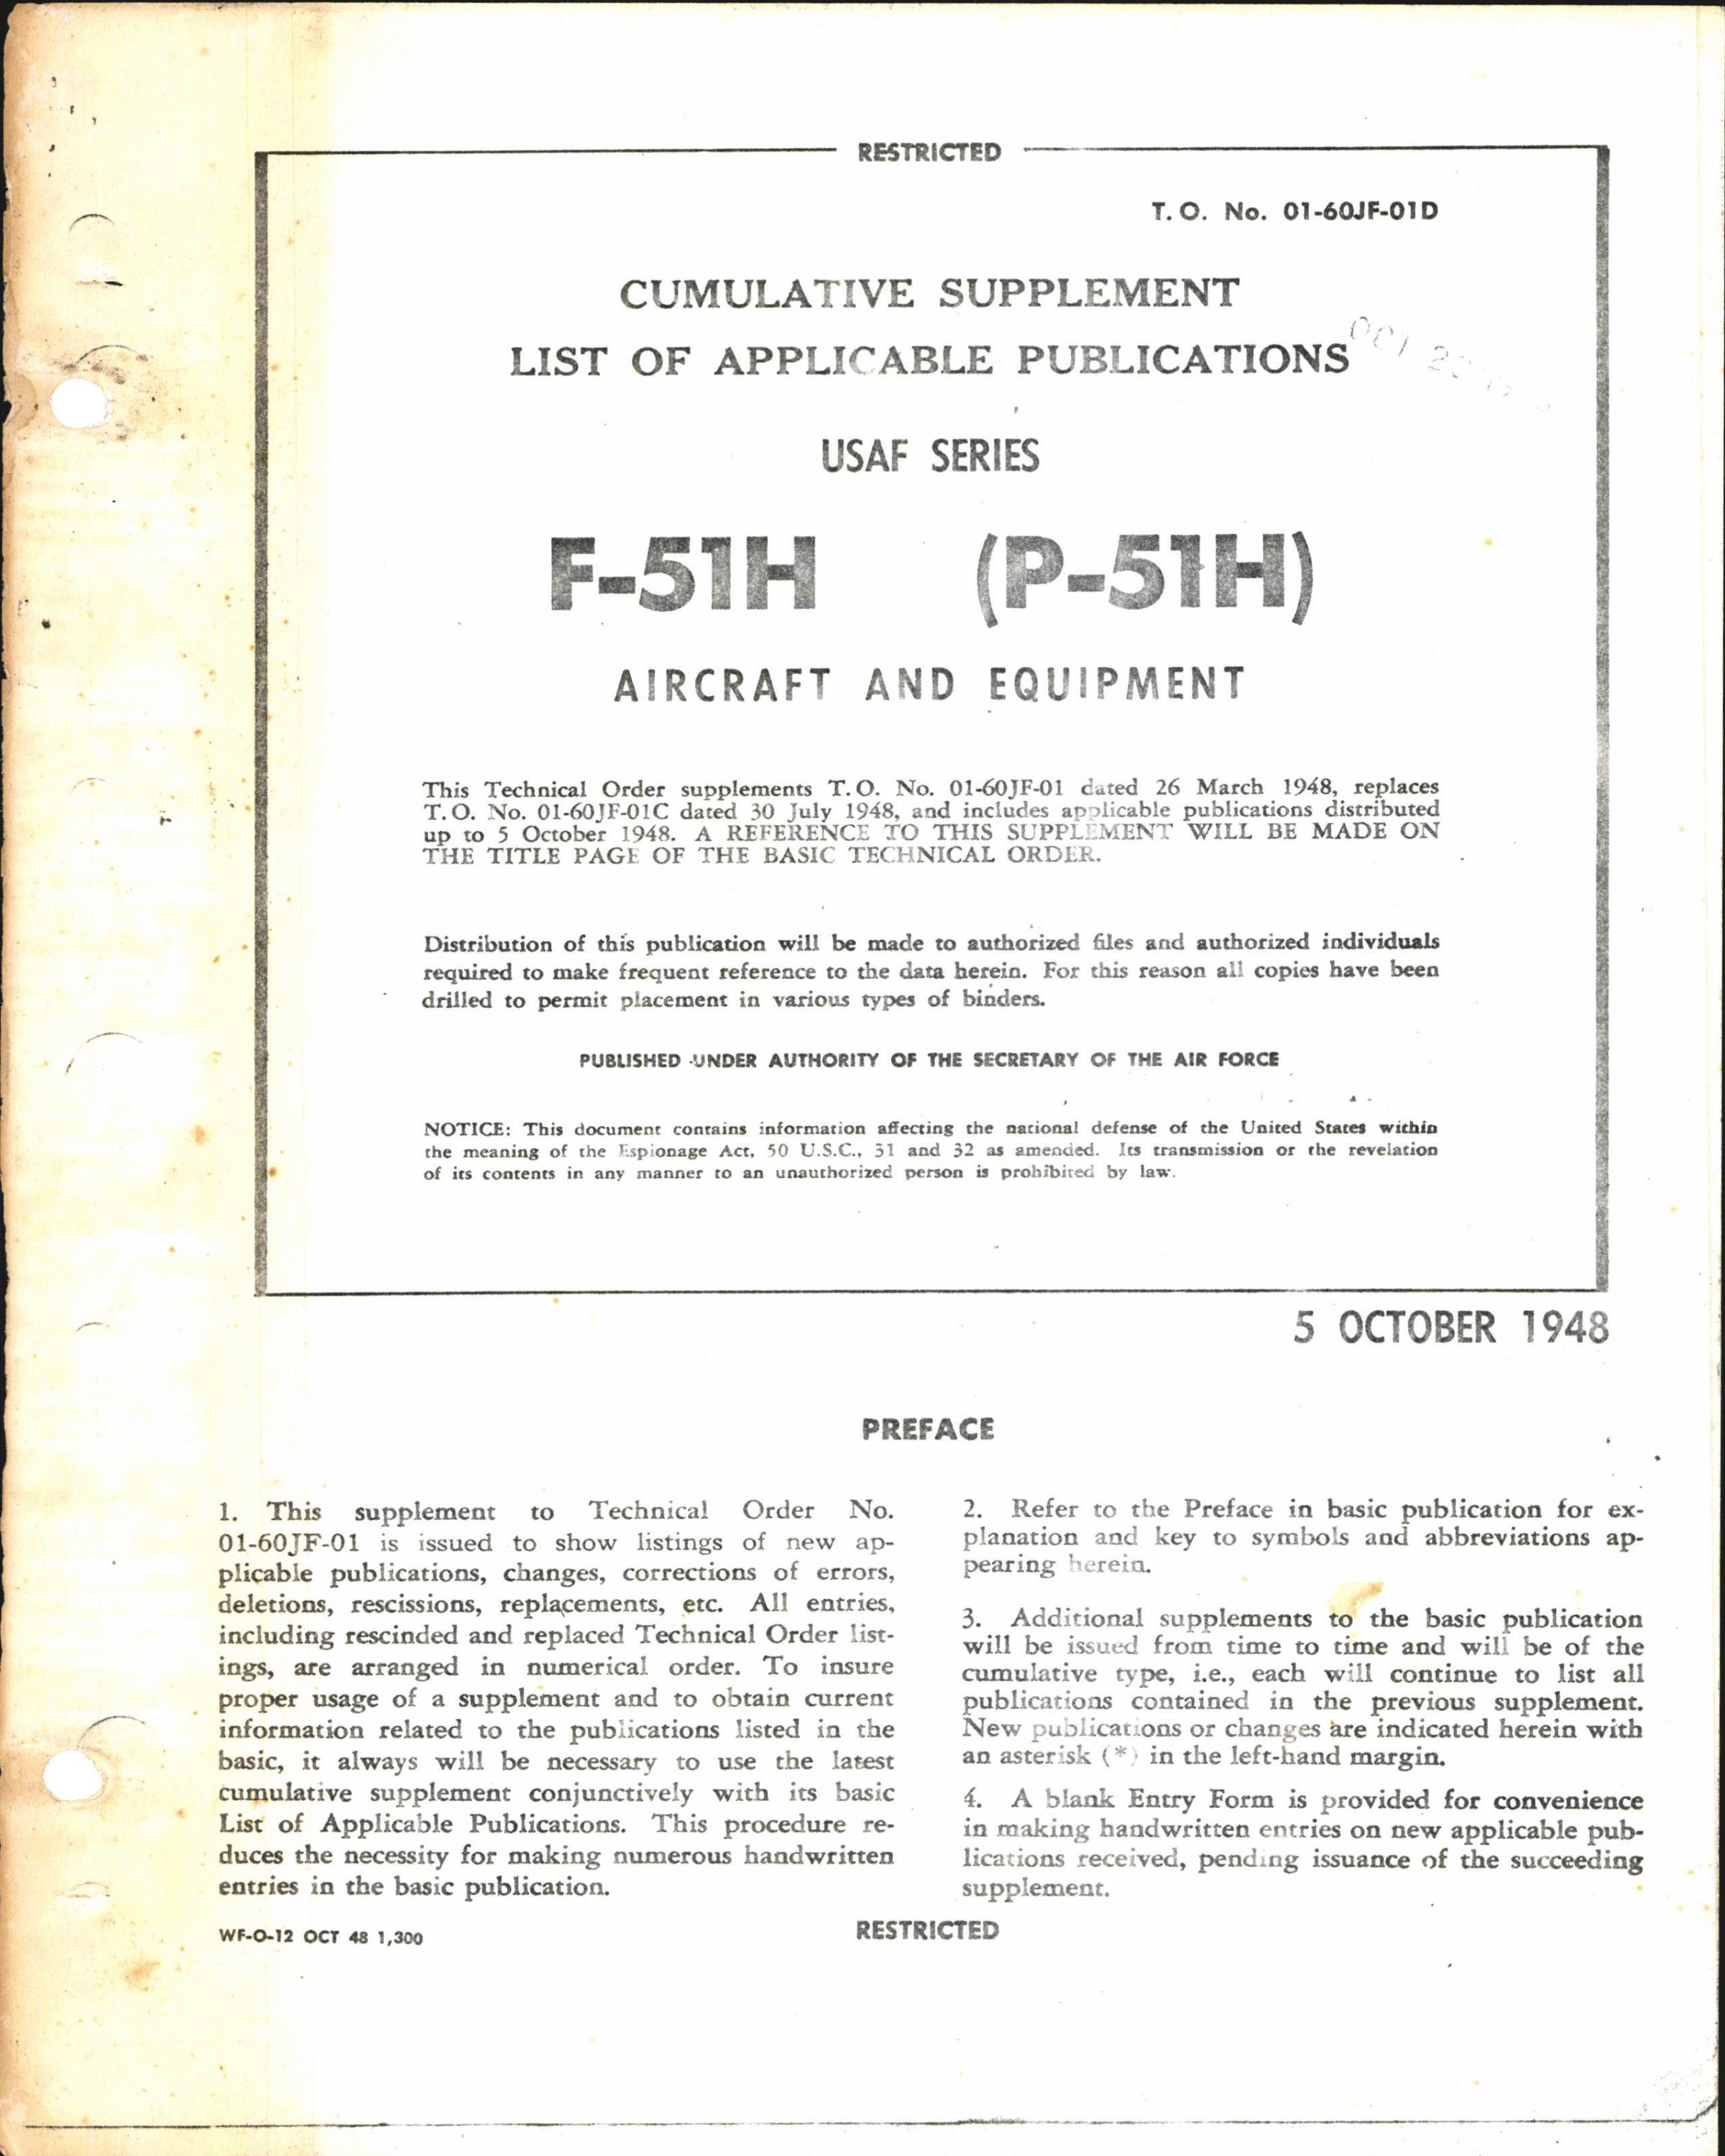 Sample page 1 from AirCorps Library document: Cumulative Supplement List of Applicable Publications for F-51H